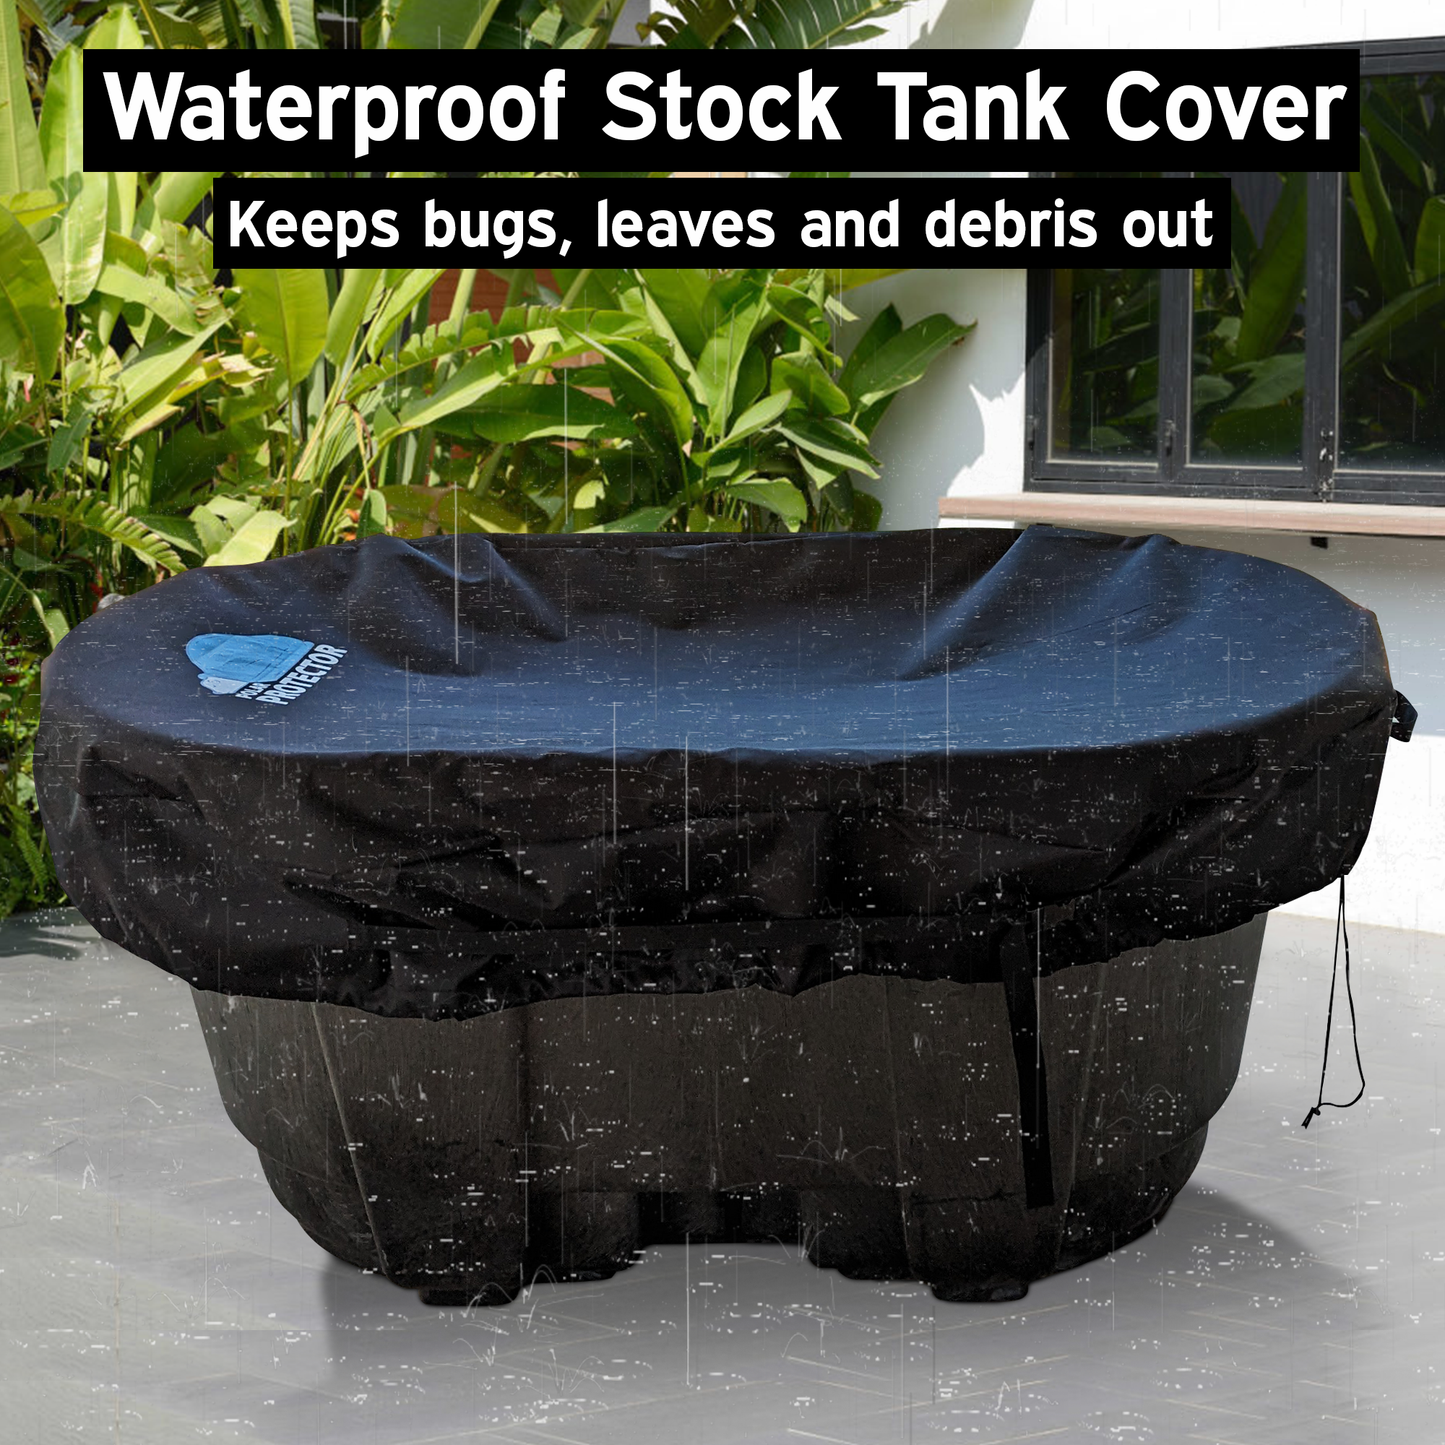  COSFUN 150 Gallon Ice Water Therapy Ice Bath Cover Cold Water  Cover ,Waterproof Heavy Duty Oval Stock Tank Cover,Black : Patio, Lawn &  Garden